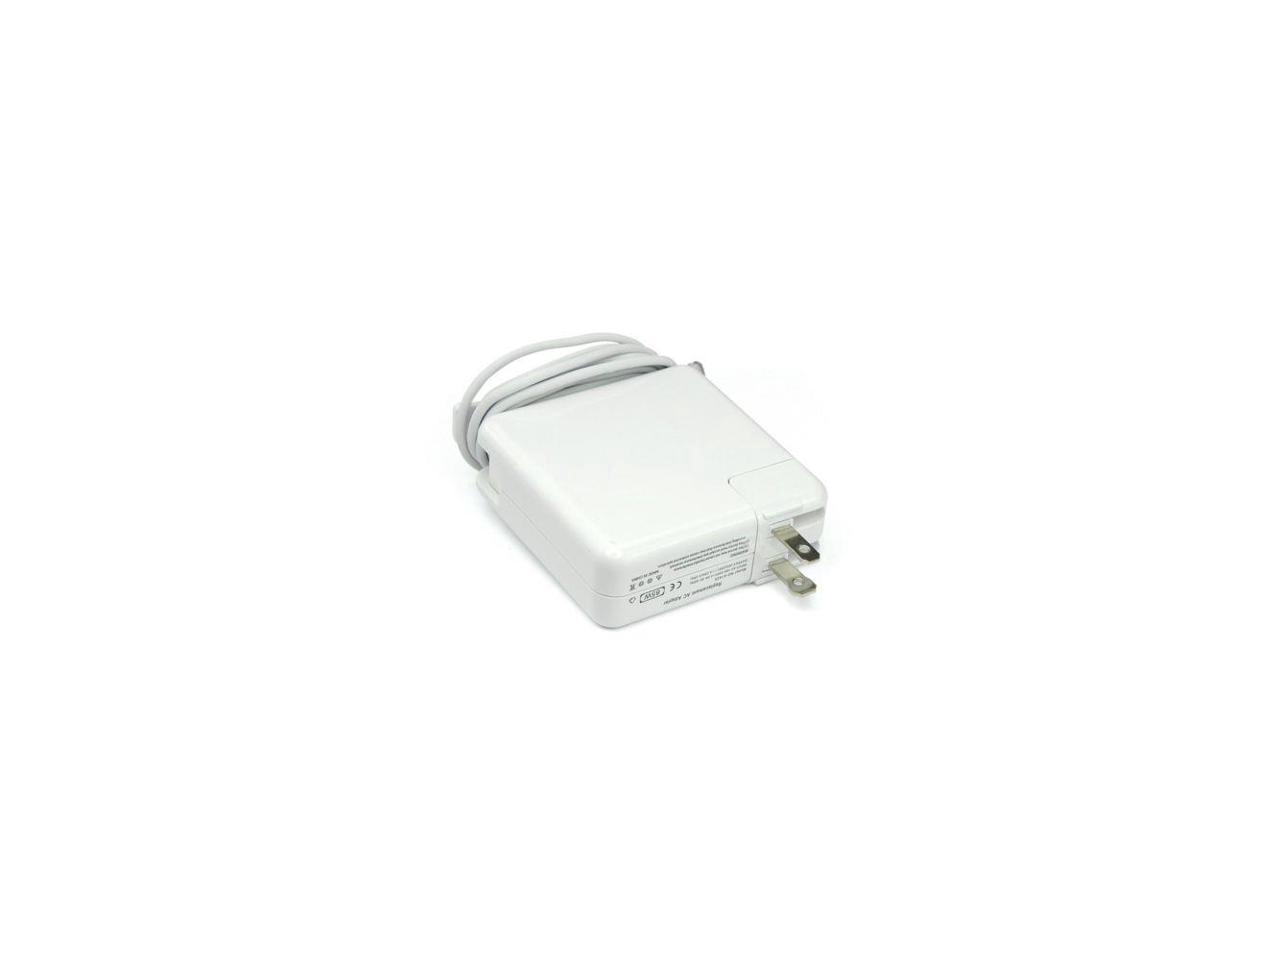 charger for macbook air model a1466